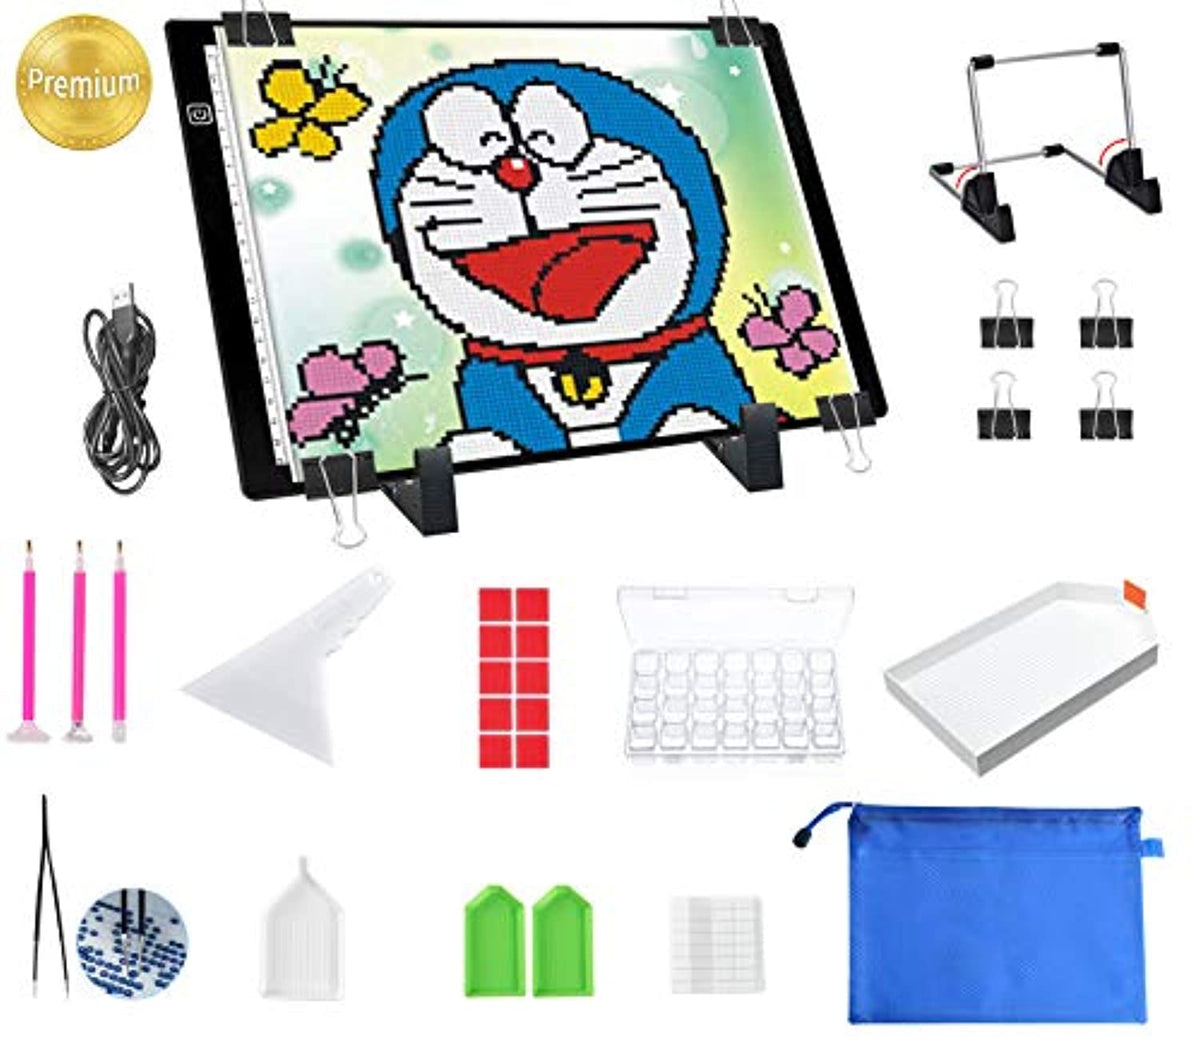 A2 Light Box, Large Size Tracing Light Pad, Ultra-Thin LED Light Board  Stepless Brightness and Flicker-Free Design, Perfect for Drawing, 2D  Animation